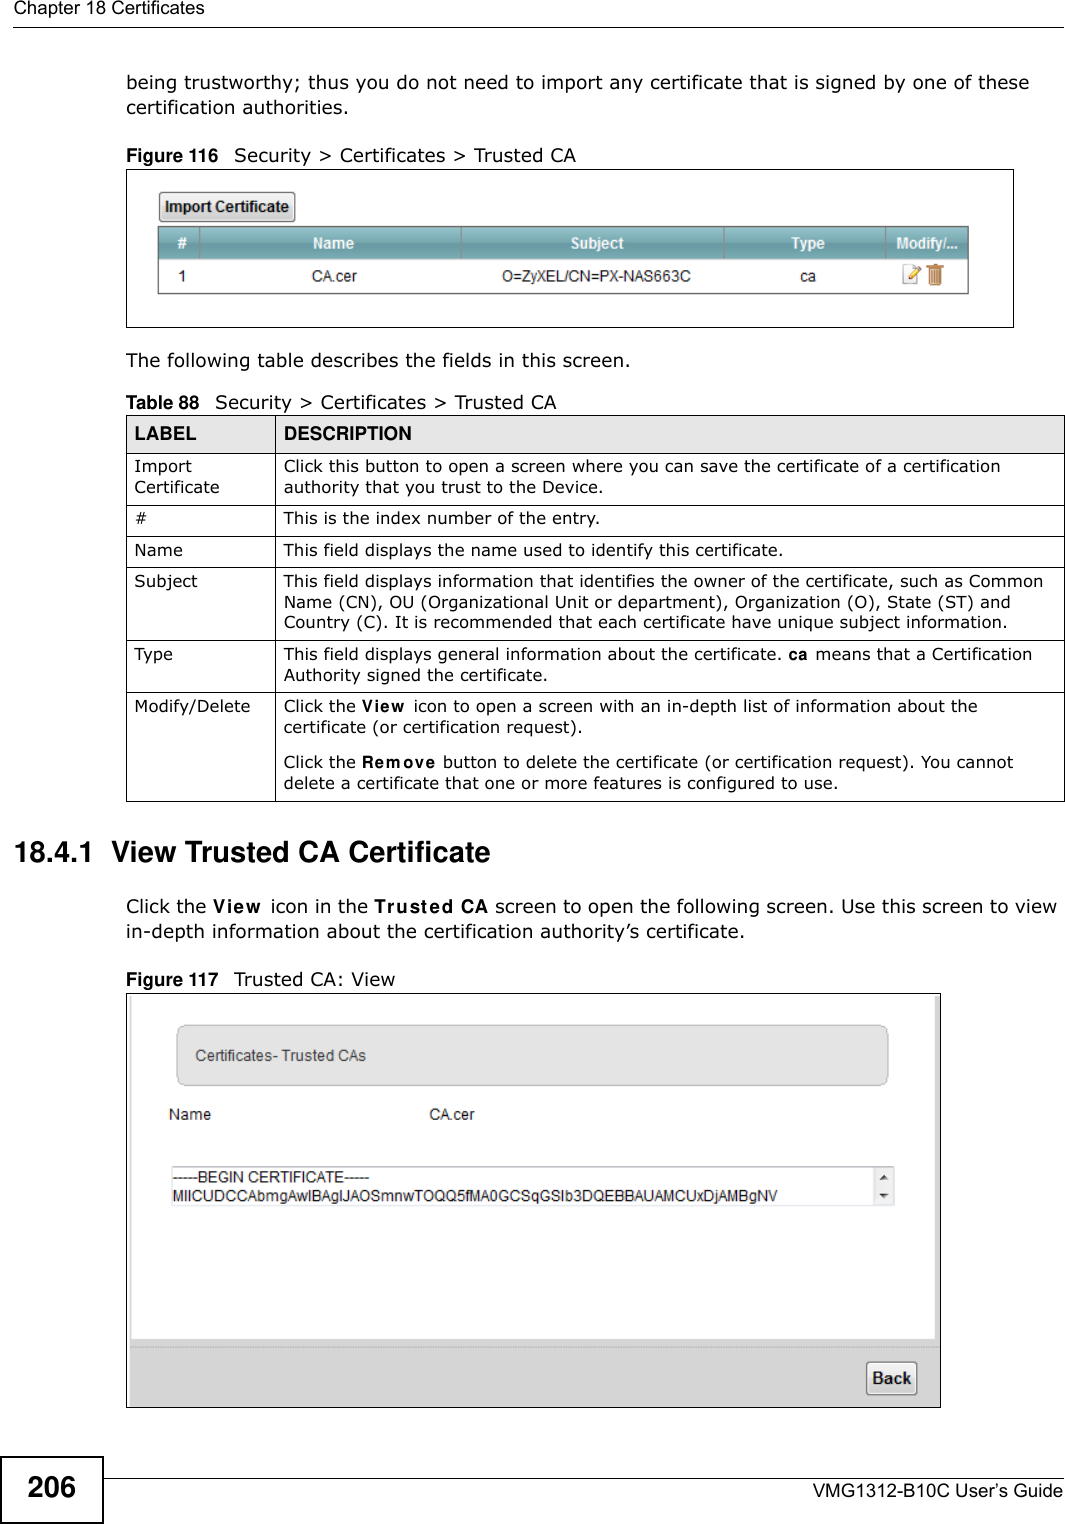 Chapter 18 CertificatesVMG1312-B10C User’s Guide206being trustworthy; thus you do not need to import any certificate that is signed by one of these certification authorities. Figure 116   Security &gt; Certificates &gt; Trusted CA The following table describes the fields in this screen. 18.4.1  View Trusted CA CertificateClick the View  icon in the Tr uste d CA screen to open the following screen. Use this screen to view in-depth information about the certification authority’s certificate.Figure 117   Trusted CA: View Table 88   Security &gt; Certificates &gt; Trusted CALABEL DESCRIPTIONImport CertificateClick this button to open a screen where you can save the certificate of a certification authority that you trust to the Device.# This is the index number of the entry.Name This field displays the name used to identify this certificate. Subject This field displays information that identifies the owner of the certificate, such as Common Name (CN), OU (Organizational Unit or department), Organization (O), State (ST) and Country (C). It is recommended that each certificate have unique subject information.Type This field displays general information about the certificate. ca means that a Certification Authority signed the certificate. Modify/Delete Click the Vie w  icon to open a screen with an in-depth list of information about the certificate (or certification request).Click the Rem ov e button to delete the certificate (or certification request). You cannot delete a certificate that one or more features is configured to use.